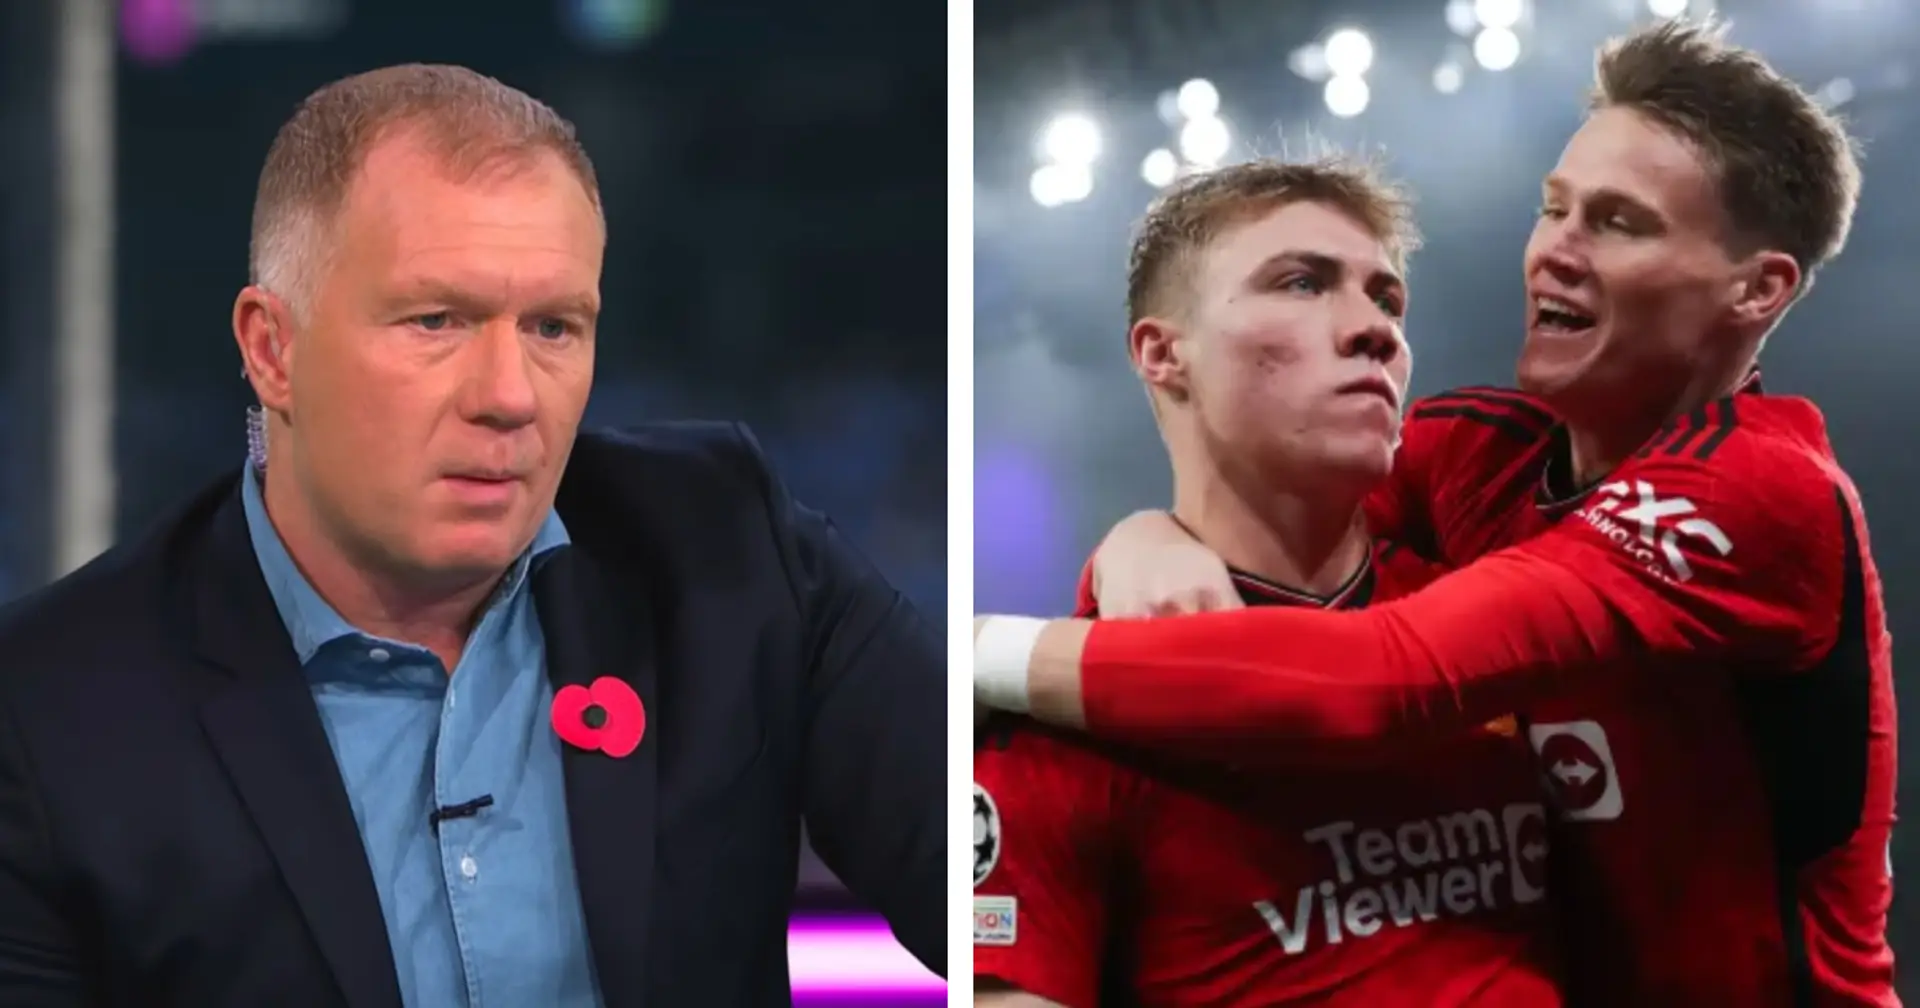 'He's so young, he needs help': Paul Scholes blames key Man United star for Rasmus Hojlund's issues